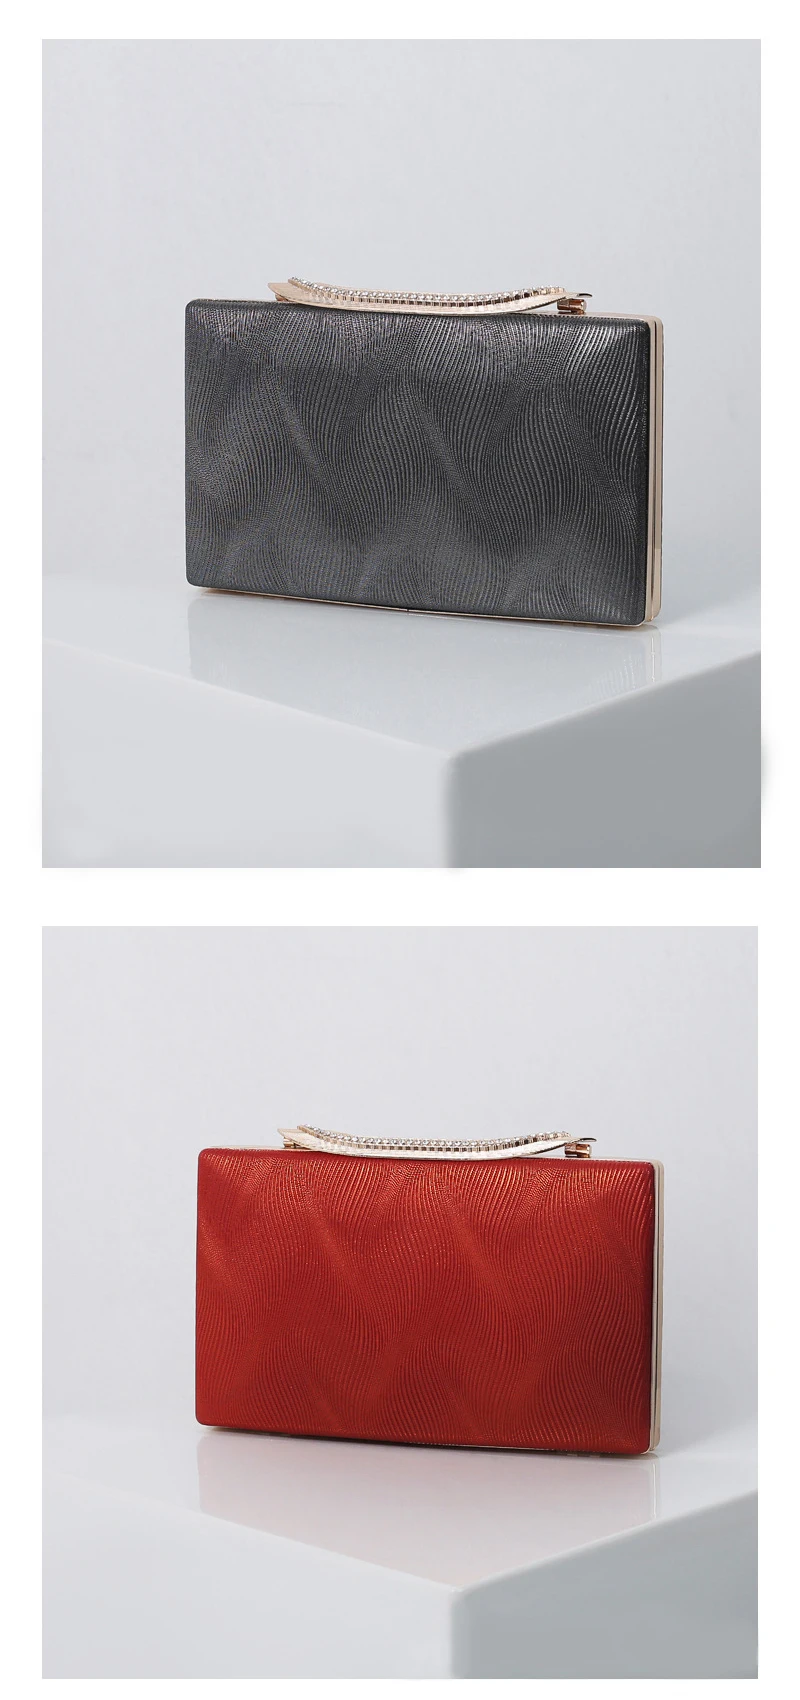 Luxy Moon PU Leather Clutch Bag Grey and Red Front View